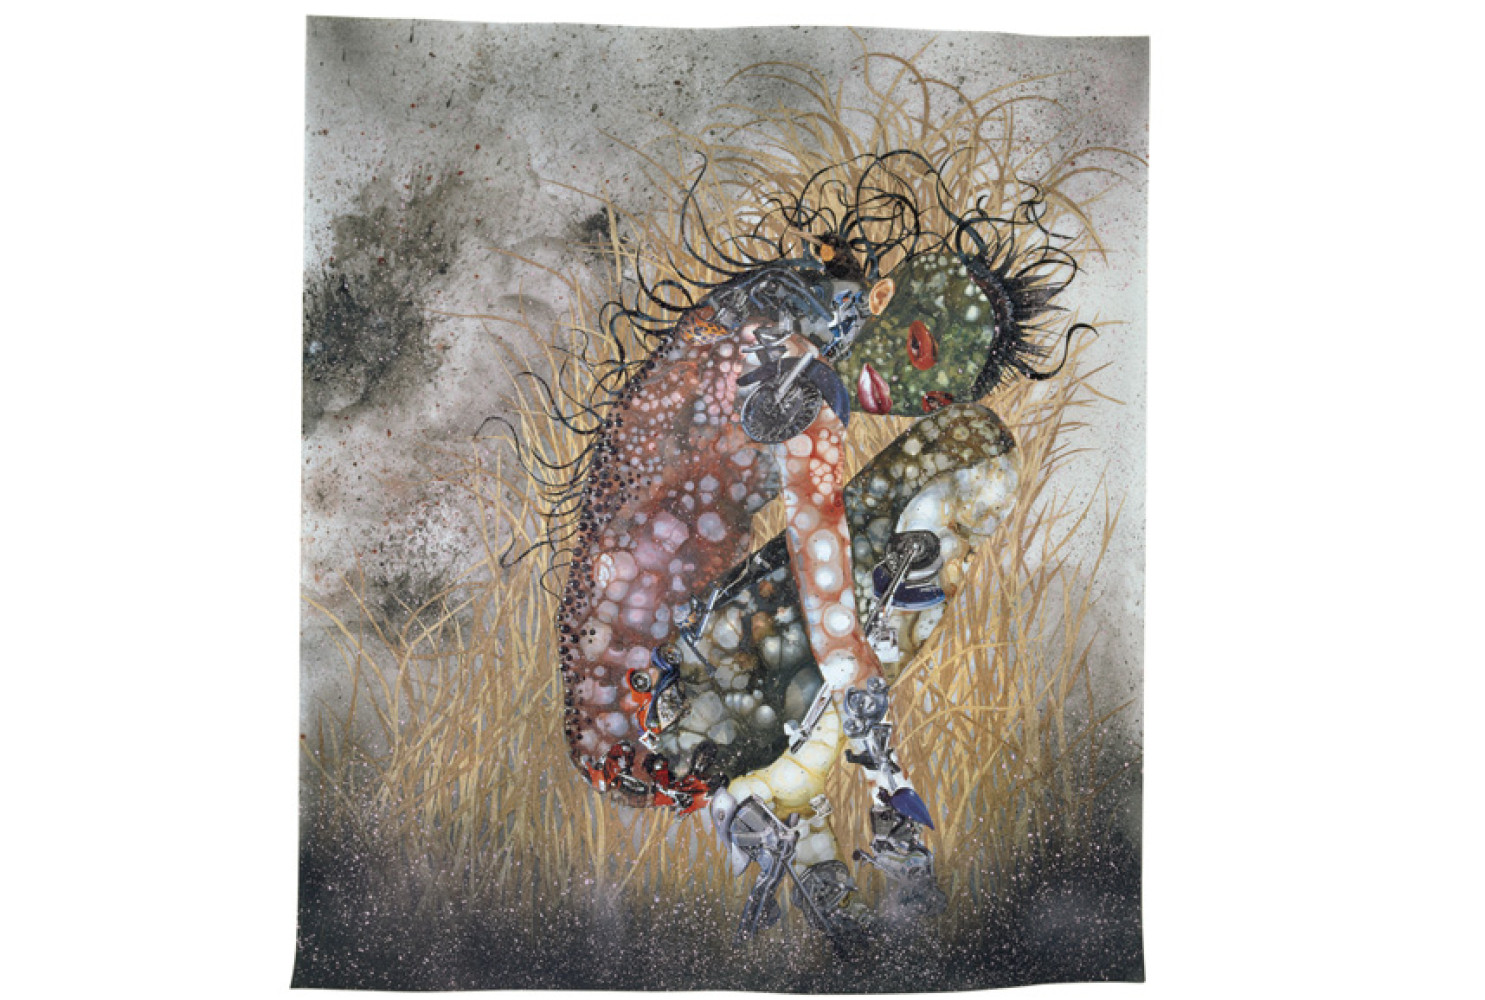 Hide 'n' Seek, Kill or Speak, 2004, Wangechi Mutu (Kenyan, b. 1972); Paint, ink, collage, mixed media on mylar; 42 x 48 inches; The Studio Museum in Harlem; Museum Purchase made possible by a gift from Jeanne Greenberg Rohatyn; Image courtesy of the artist